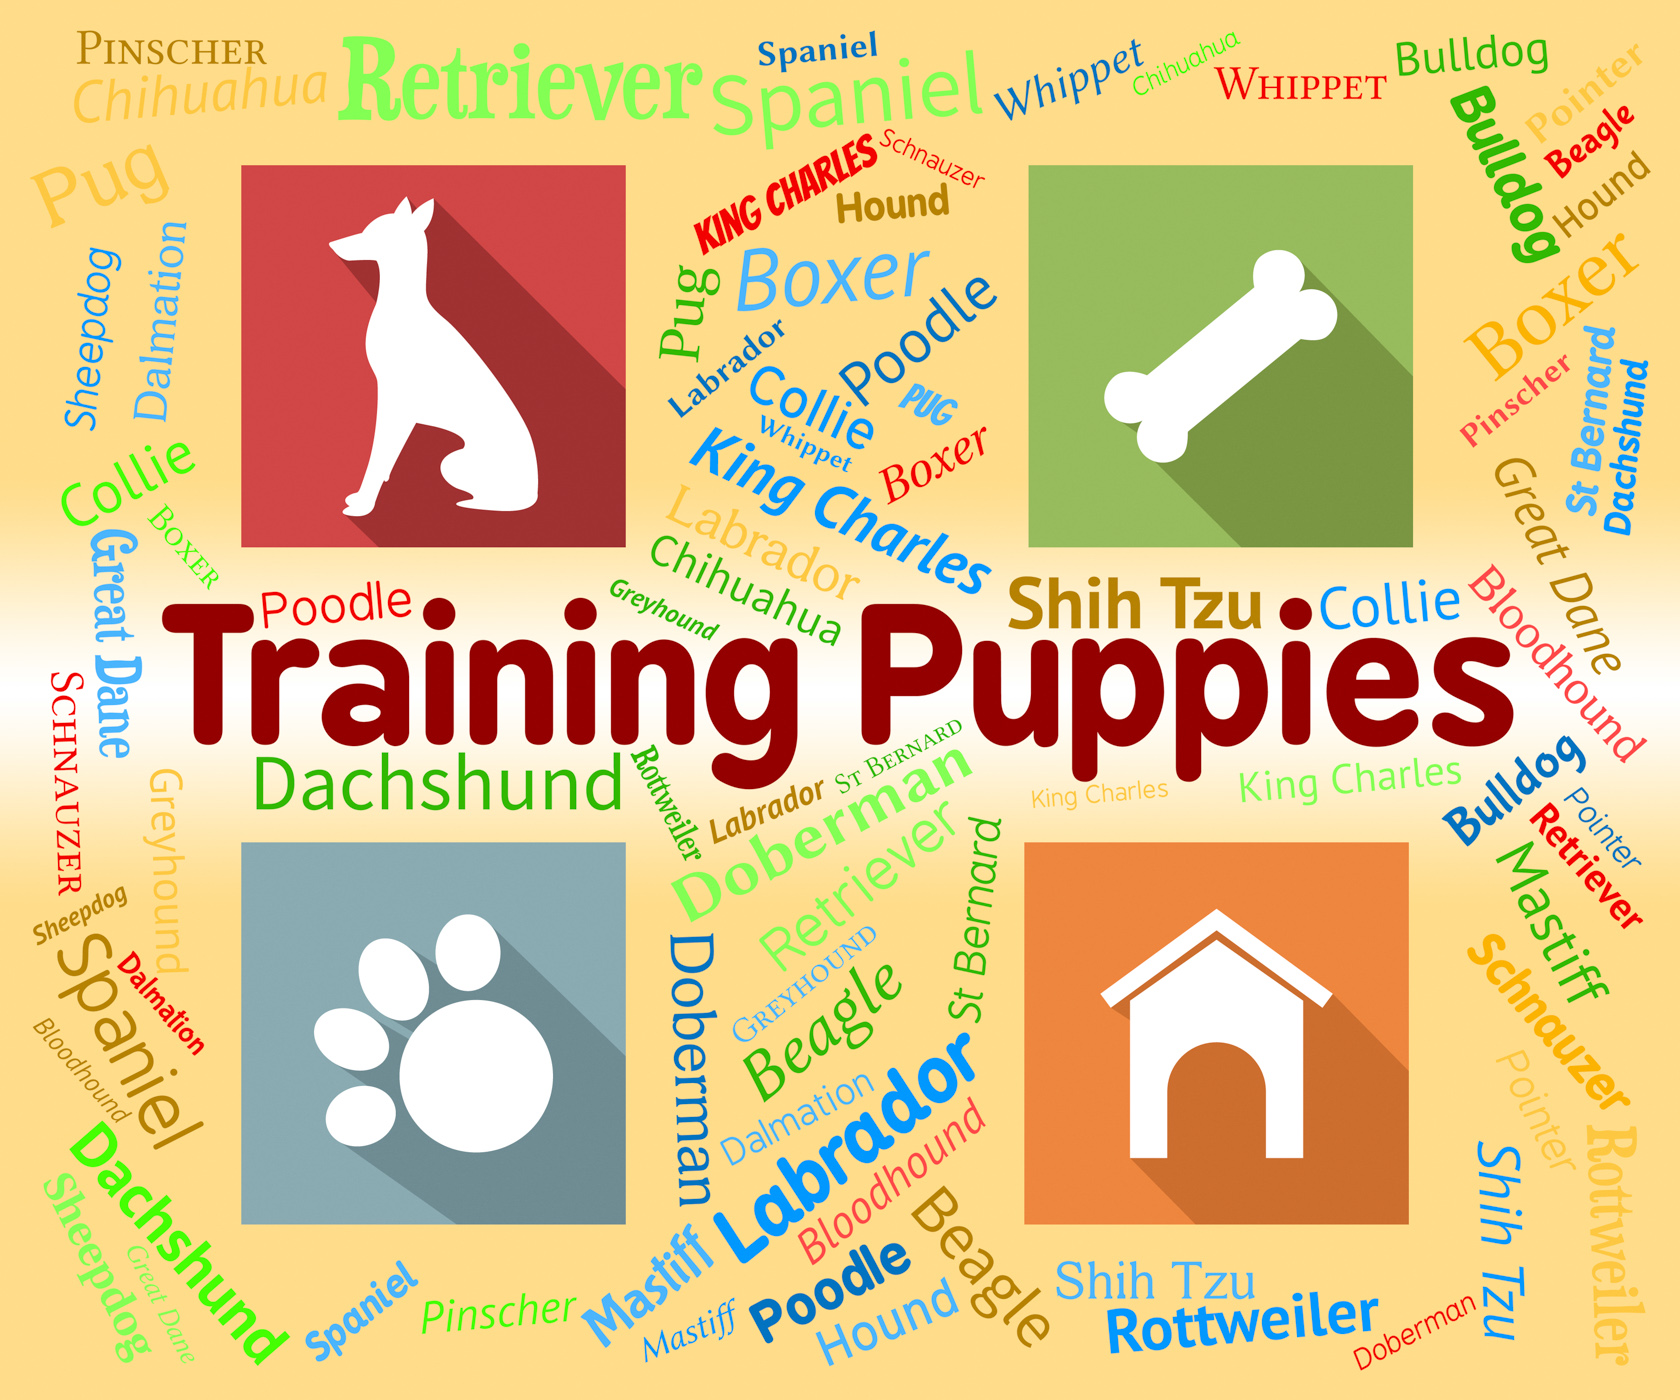 Training puppies represents instruction pedigree and pets photo